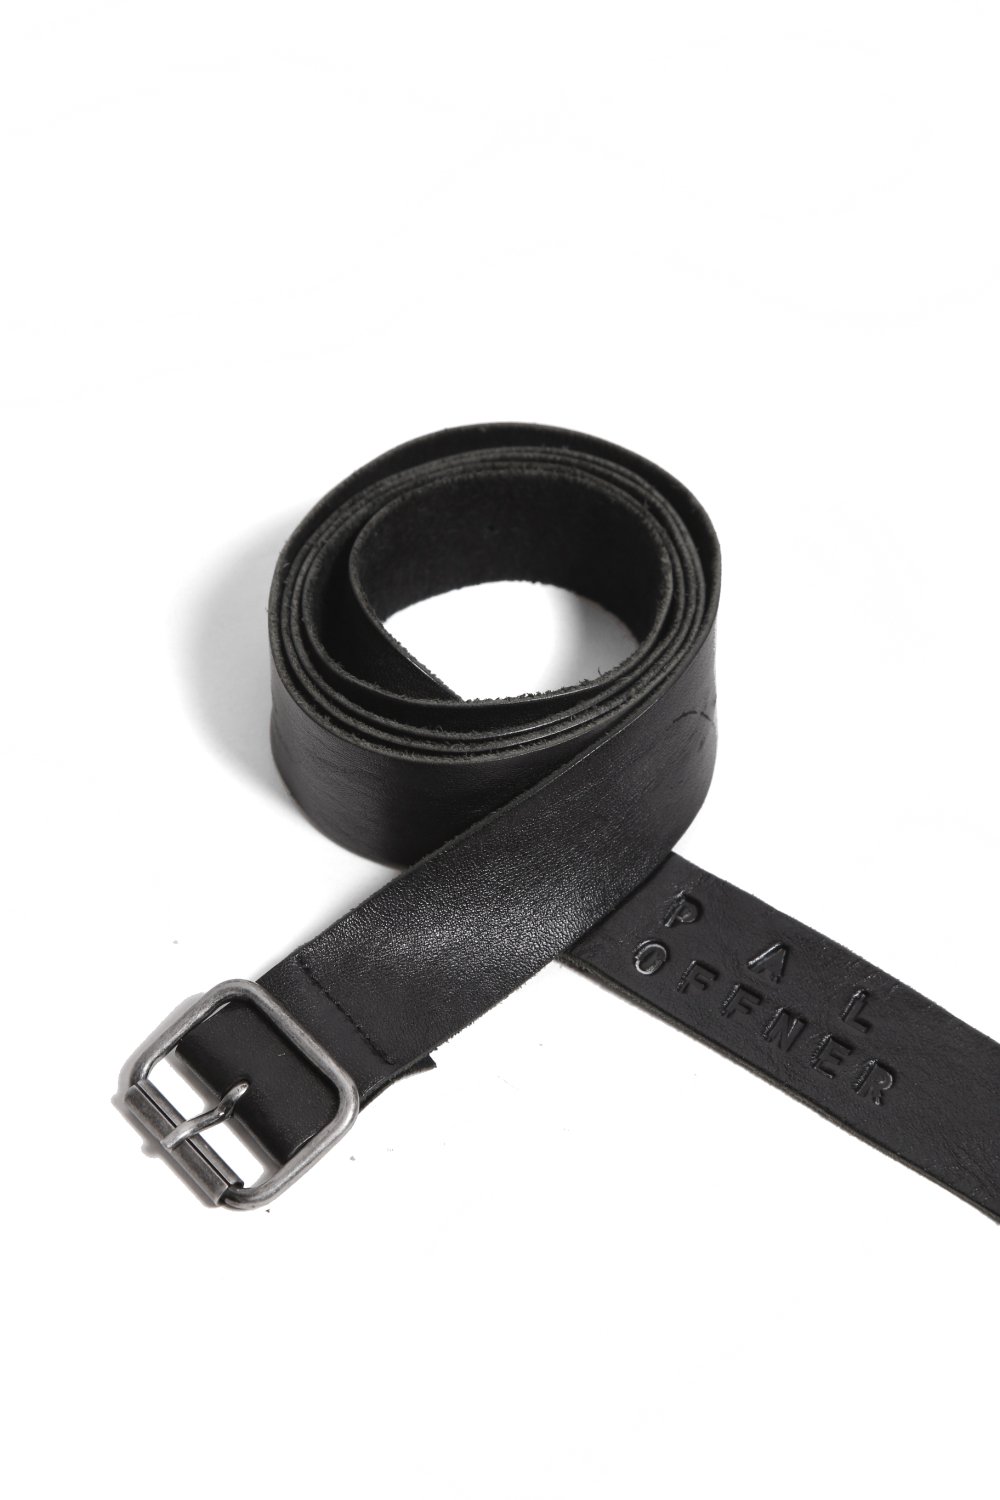 <img class='new_mark_img1' src='https://img.shop-pro.jp/img/new/icons1.gif' style='border:none;display:inline;margin:0px;padding:0px;width:auto;' />PAL OFFNER /  EASY LONG BELT / CALF LEATHER (BLACK)